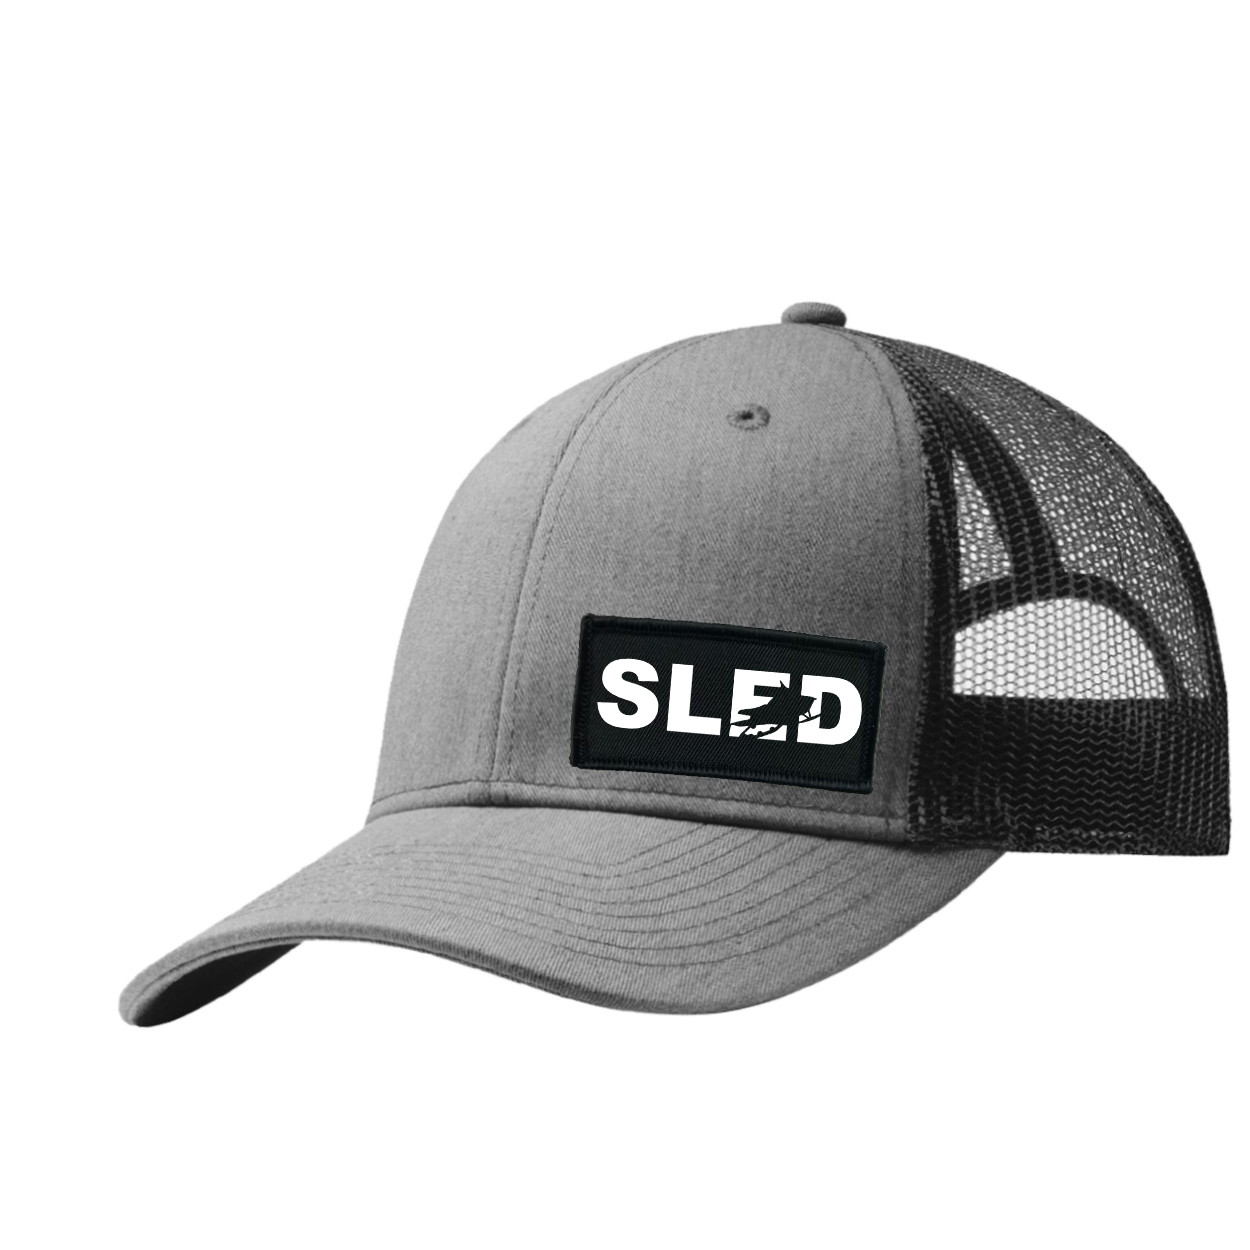 Sled Snowmobile Logo Night Out Woven Patch Snapback Trucker Hat Heather Gray/Black (White Logo)